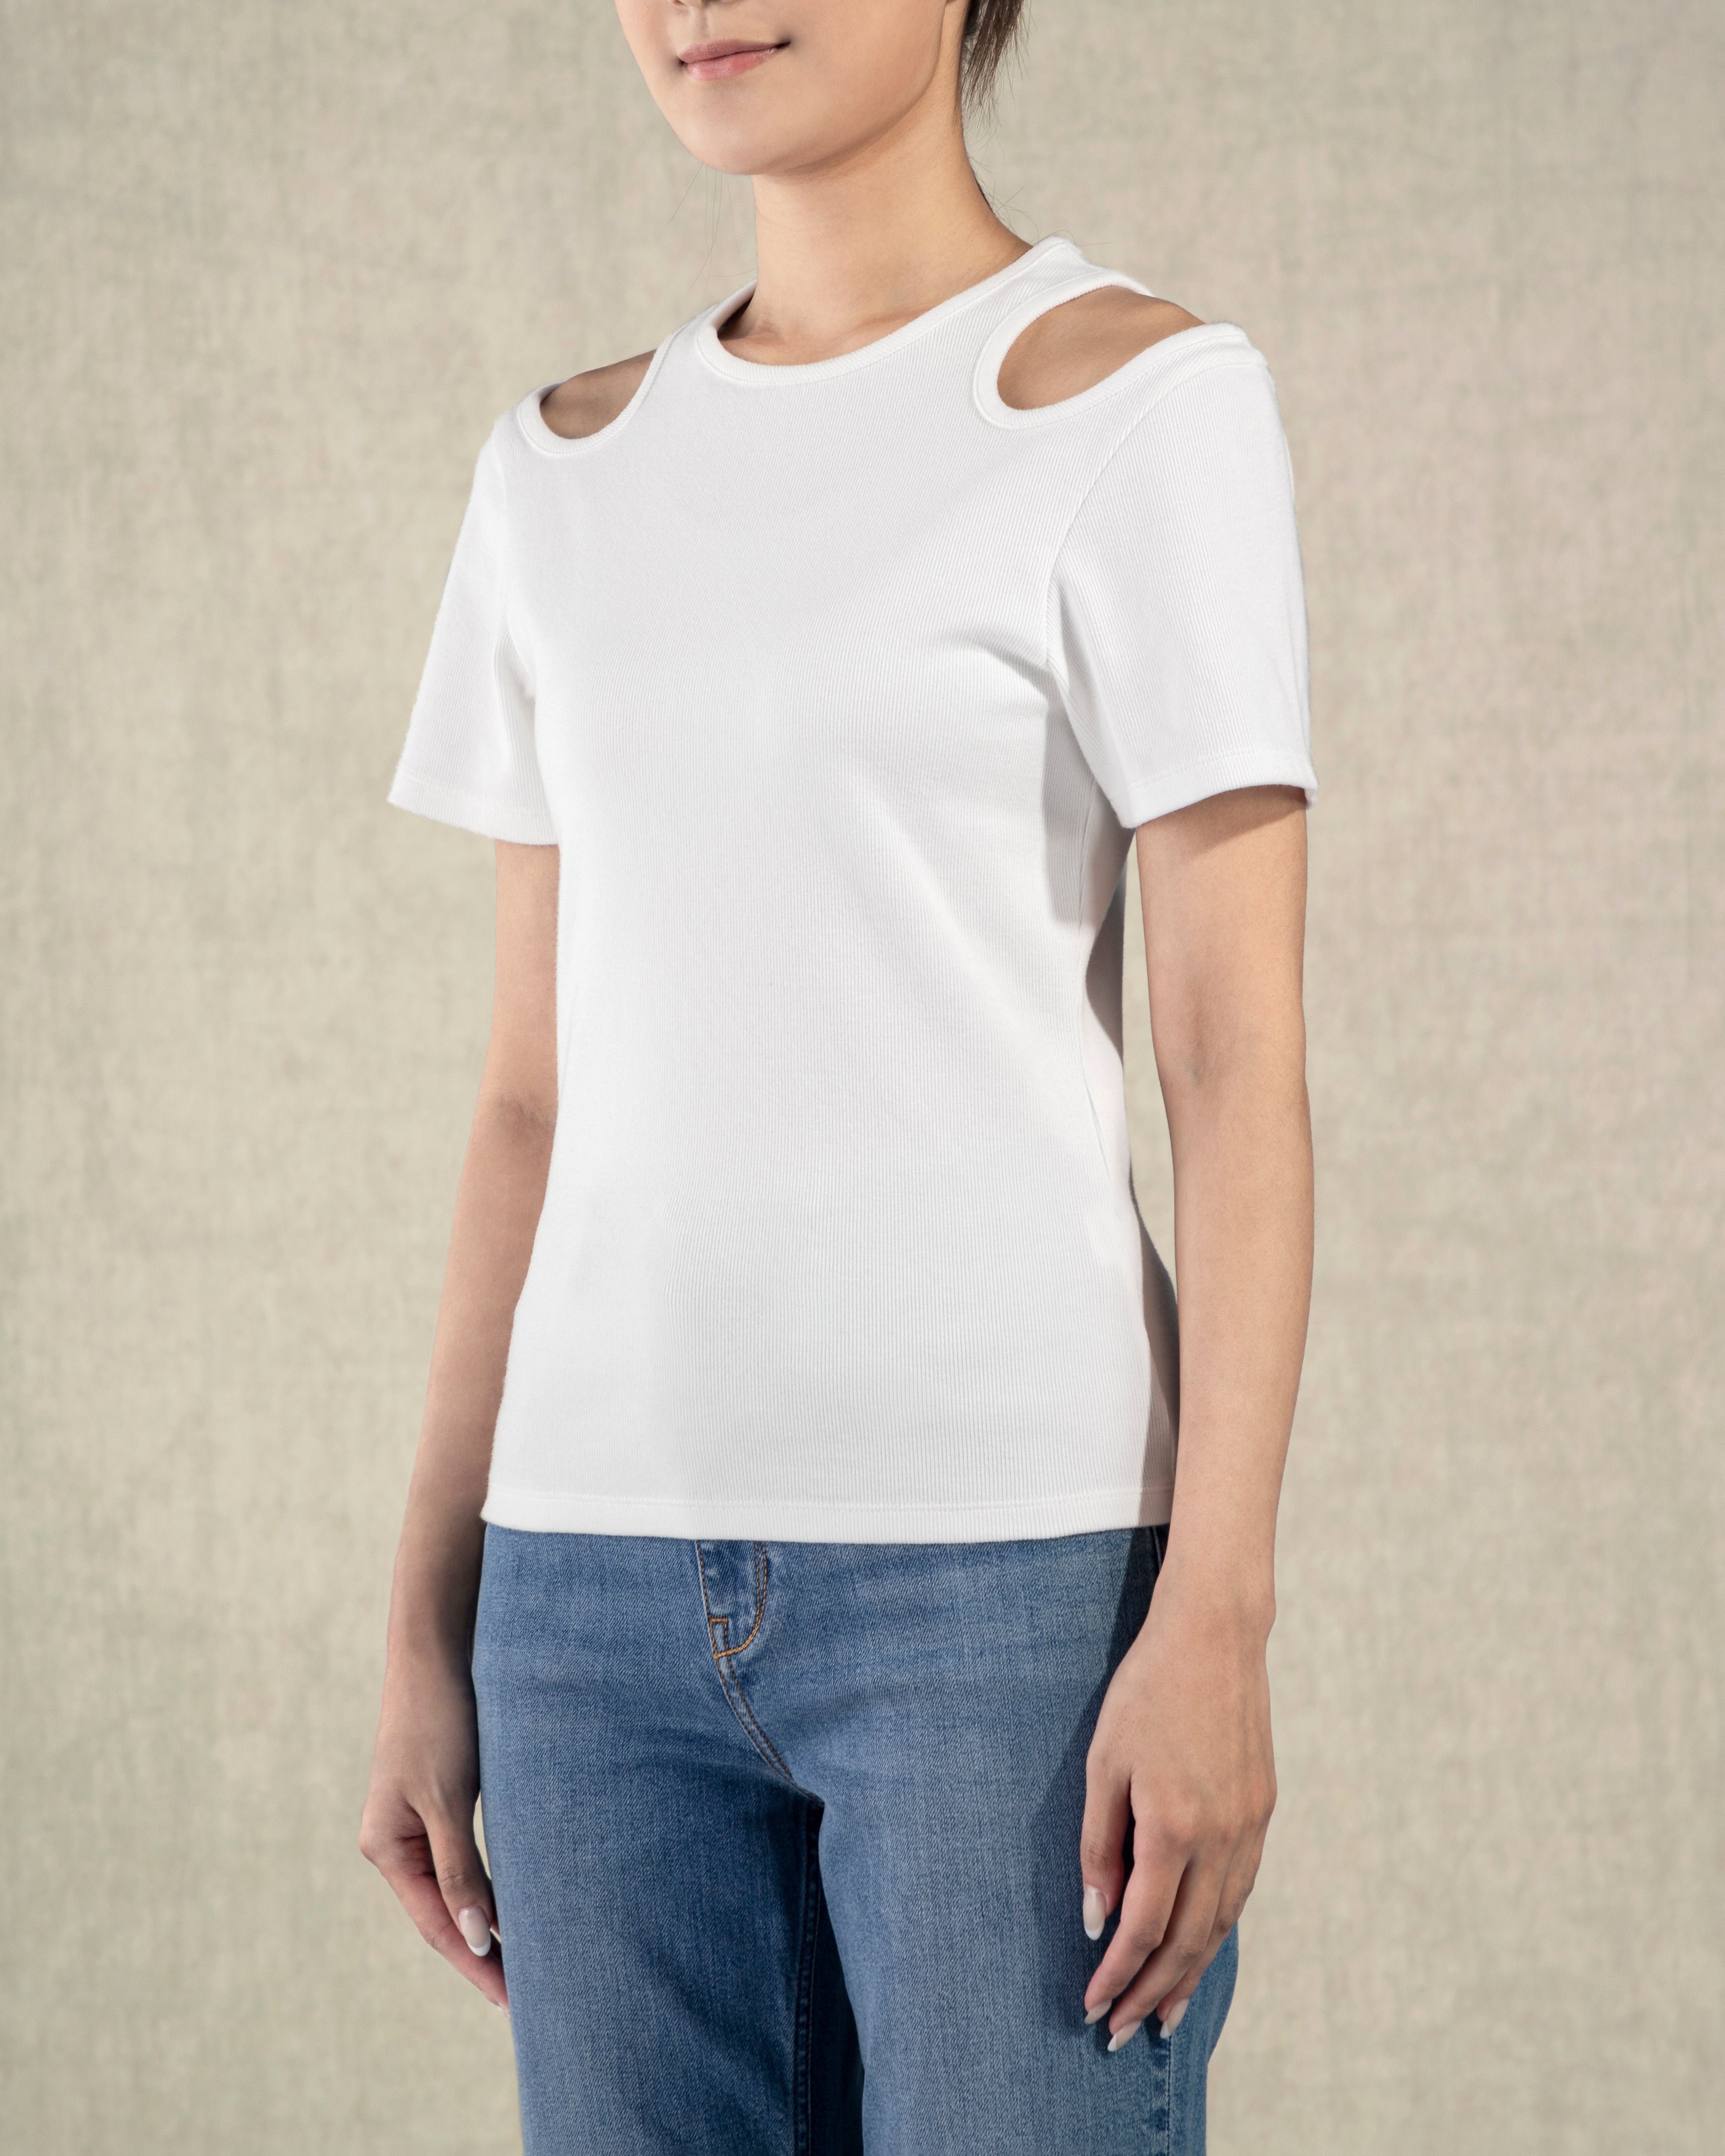 Pure White Shoulder Cut Out Tee Womens Future Classics Summer Short Sleeve